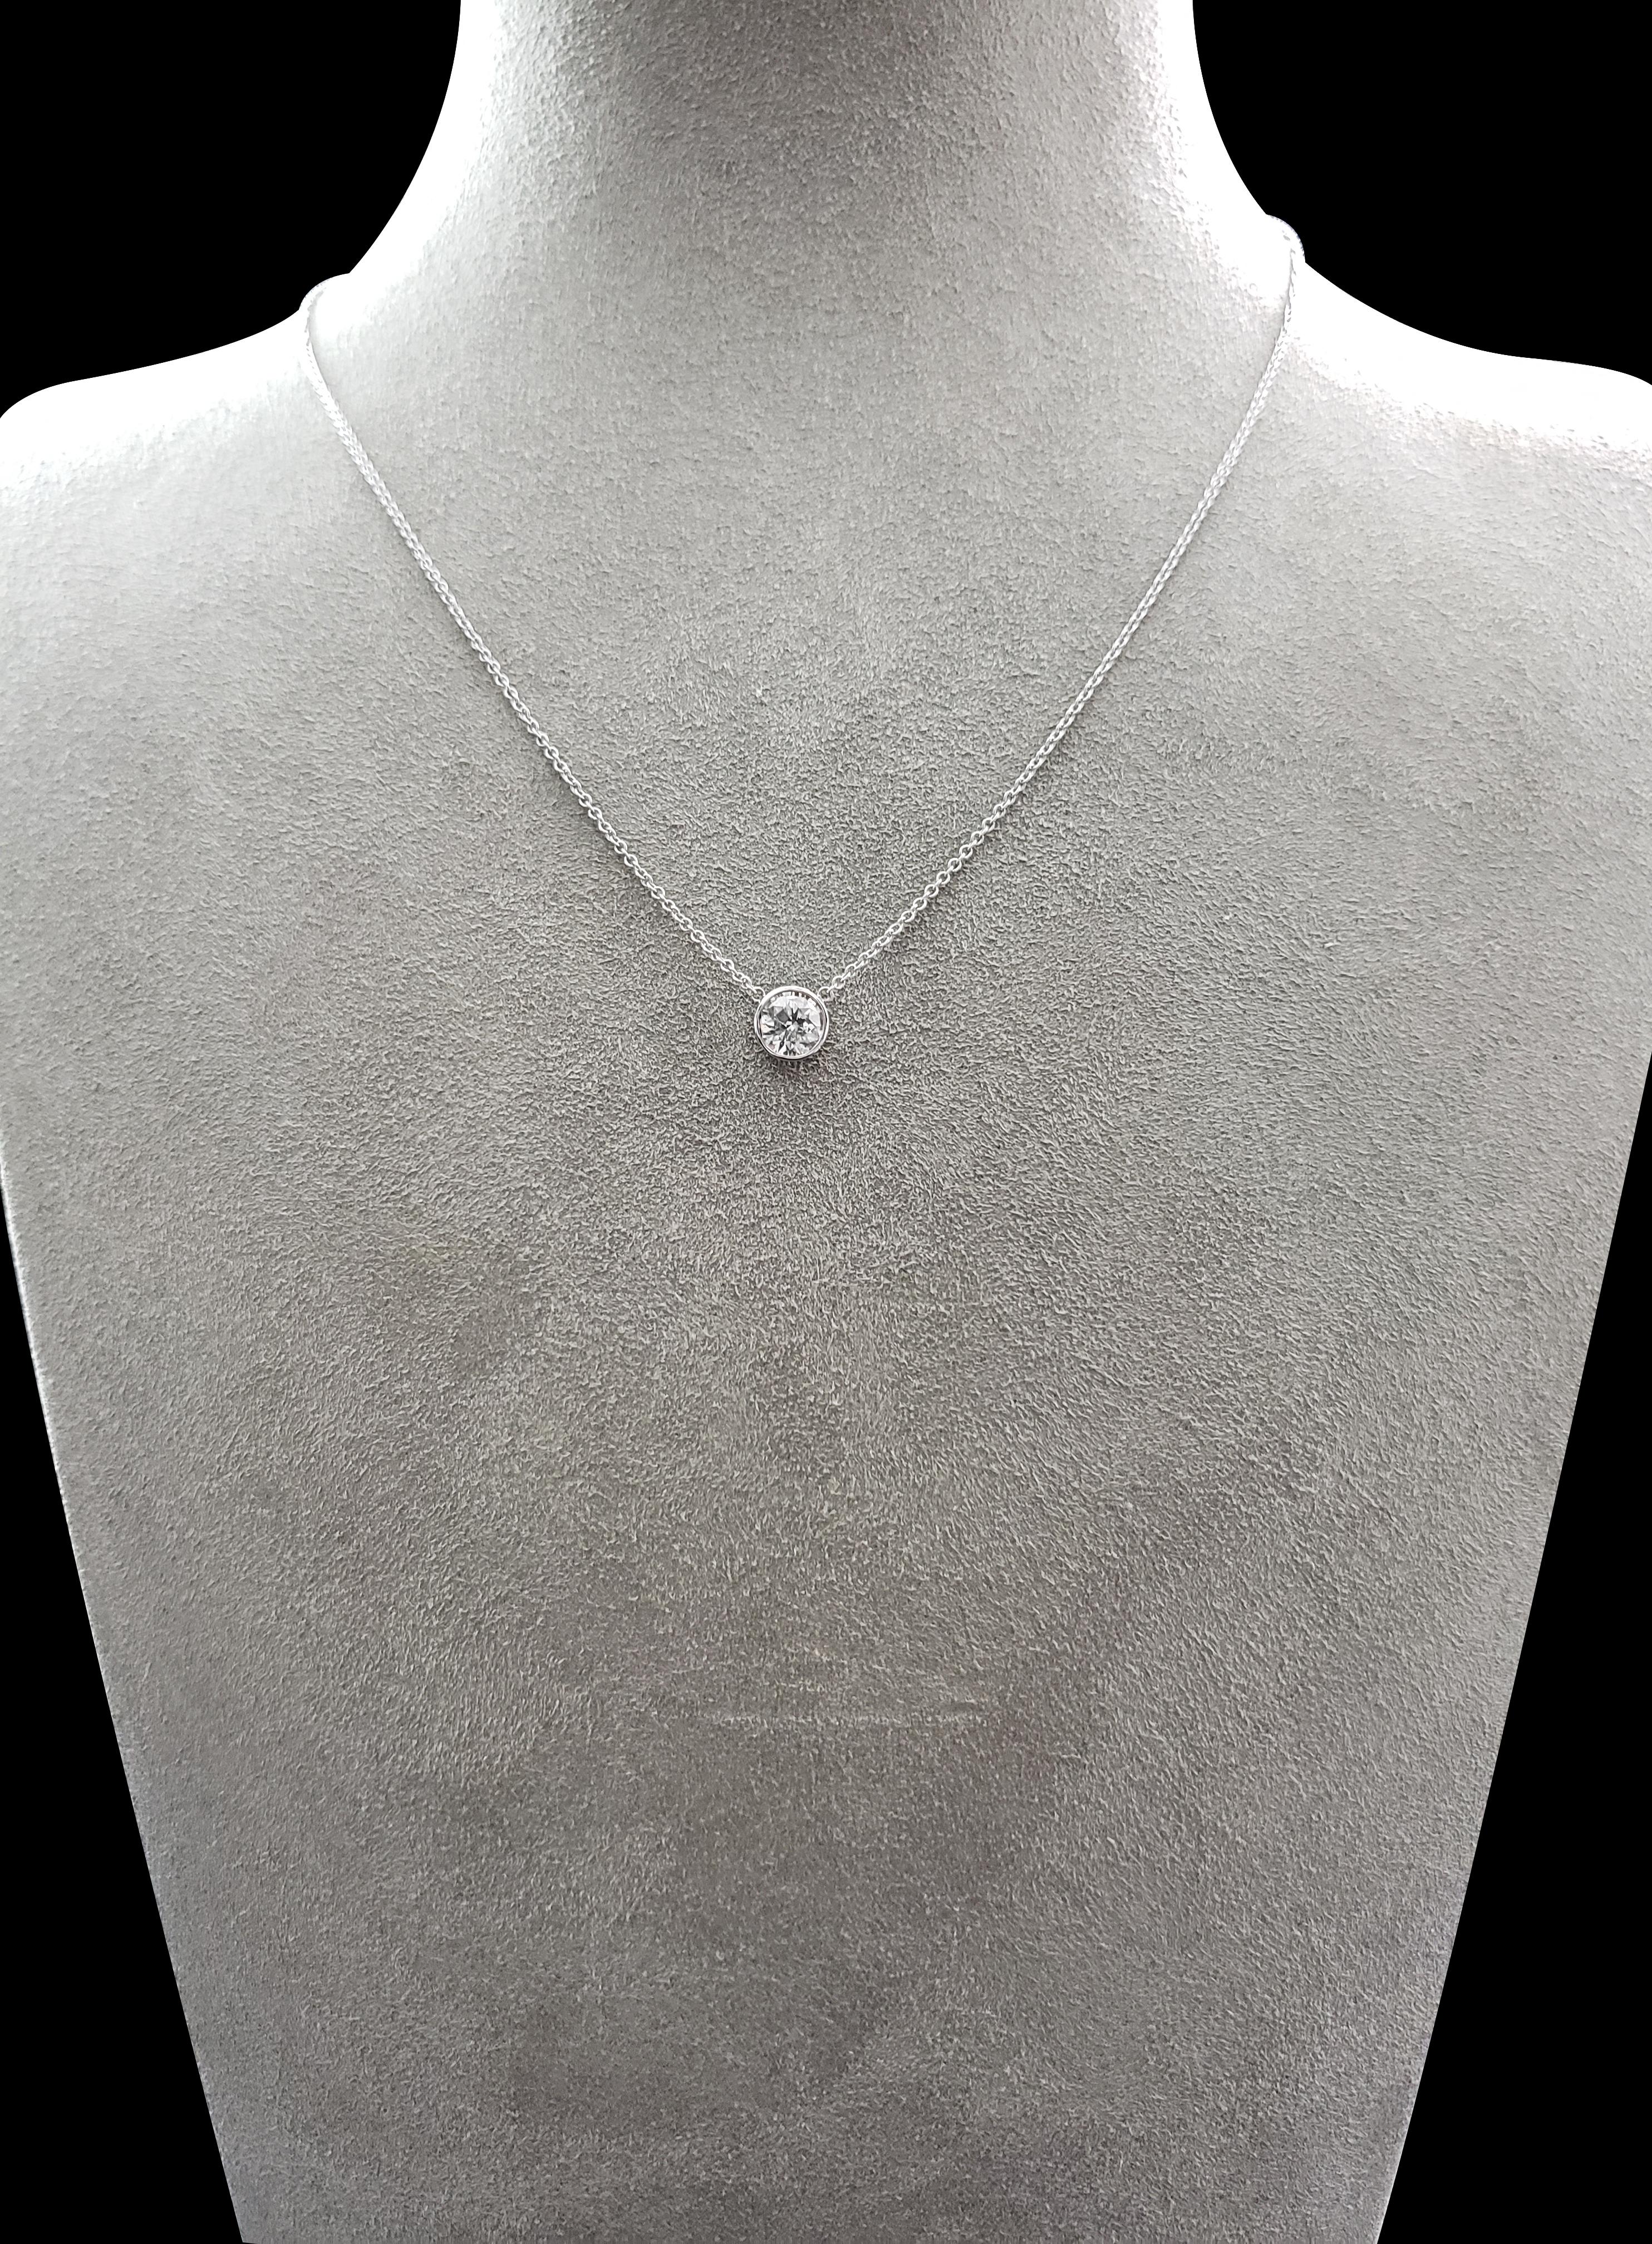 A simple and versatile solitaire pendant necklace, showcasing a 14K white gold bezel-set single round diamond that is attached to a 16 inch white gold chain. 

Roman Malakov is a custom house, specializing in creating anything you can imagine. If